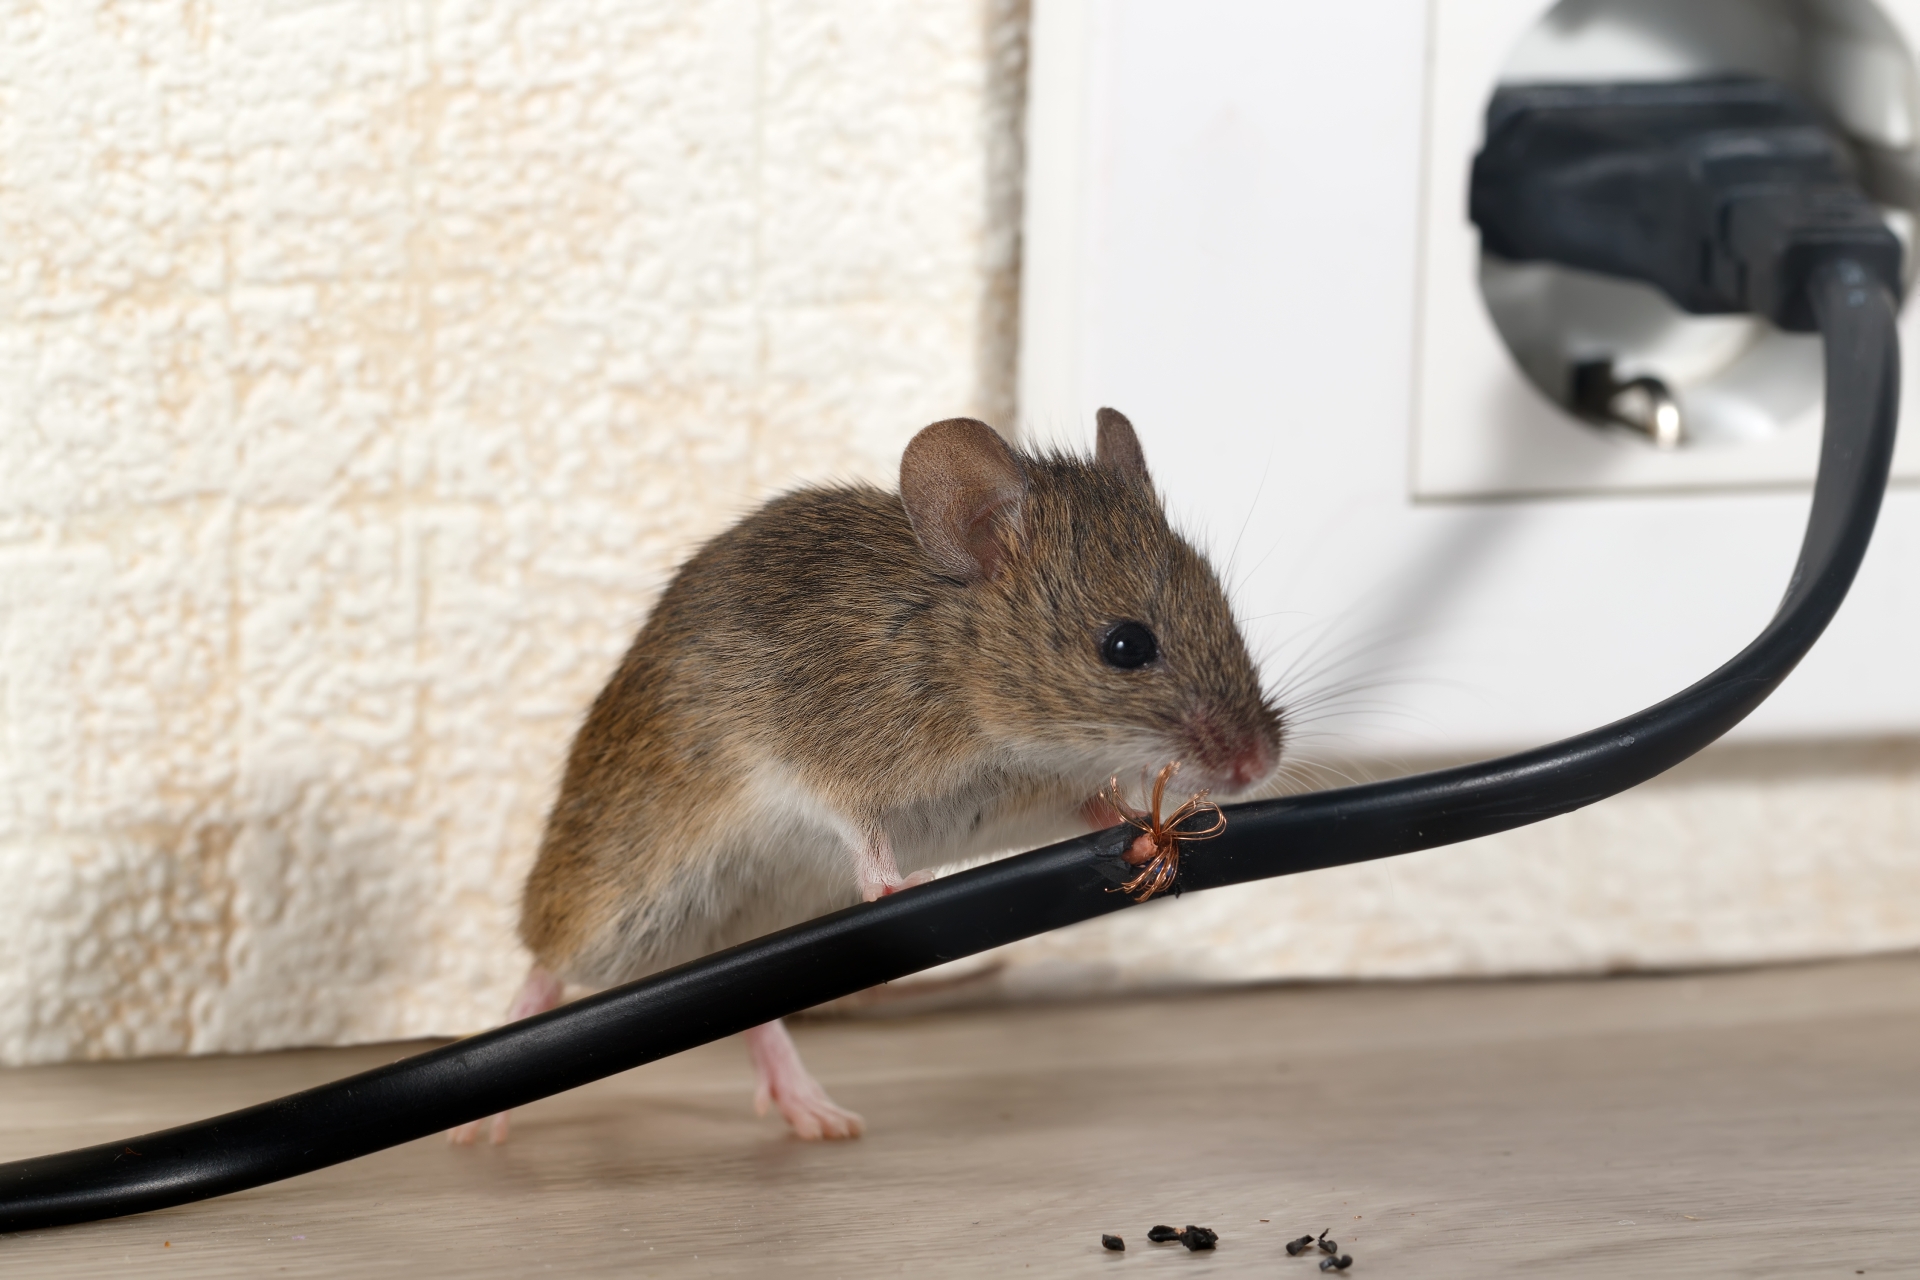 Mice Infestation, Pest Control in Merton, SW19. Call Now 020 8166 9746